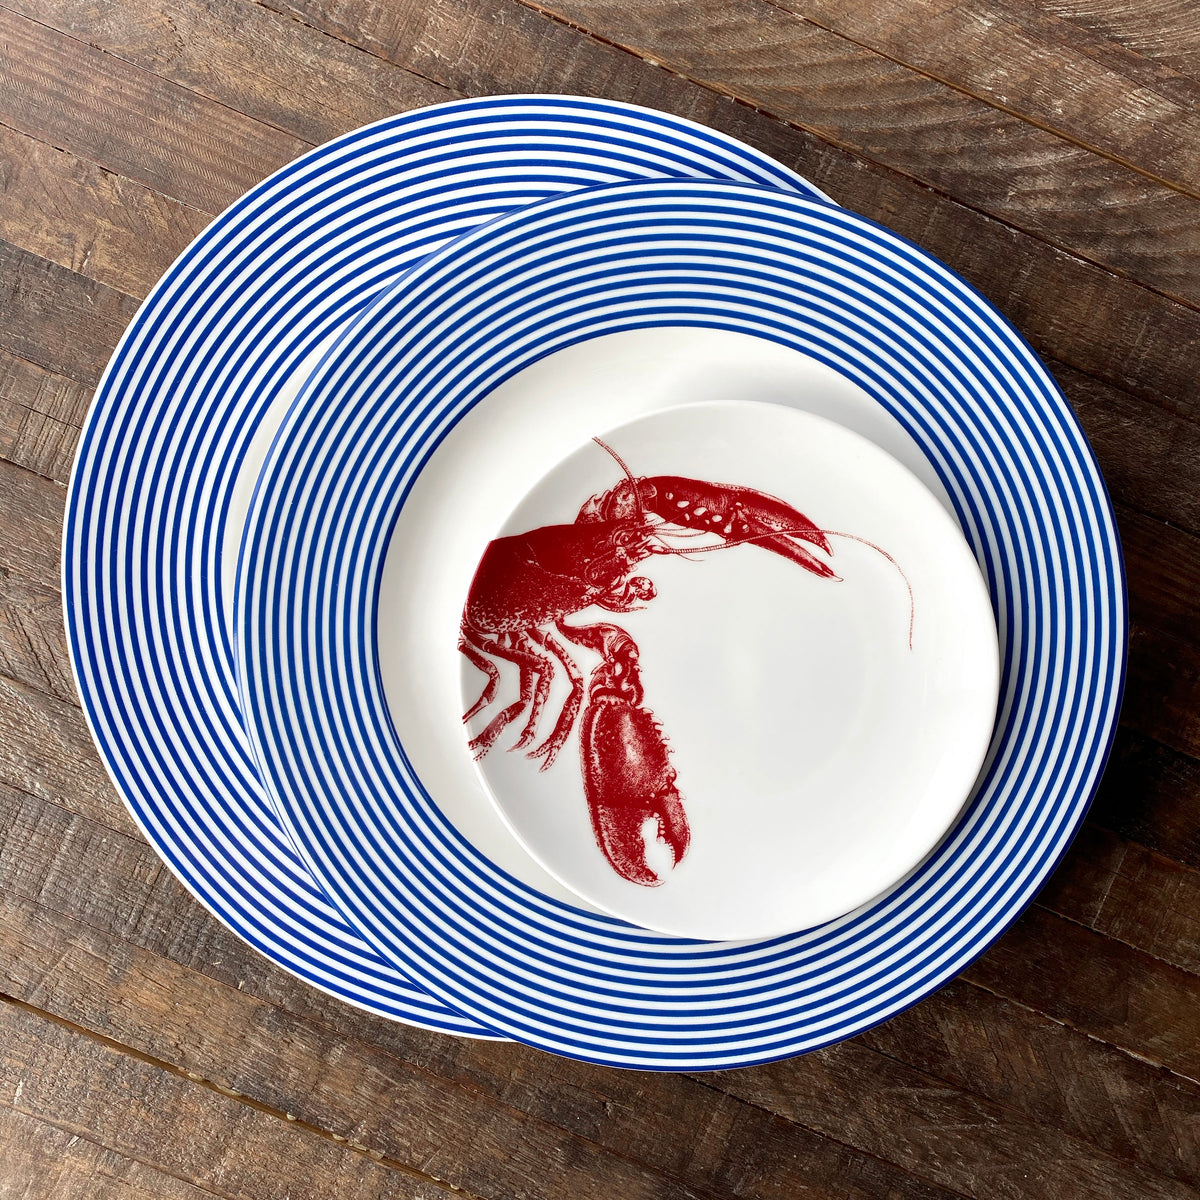 A Newport Blue Charger Plate from Caskata Artisanal Home with a lobster on it.